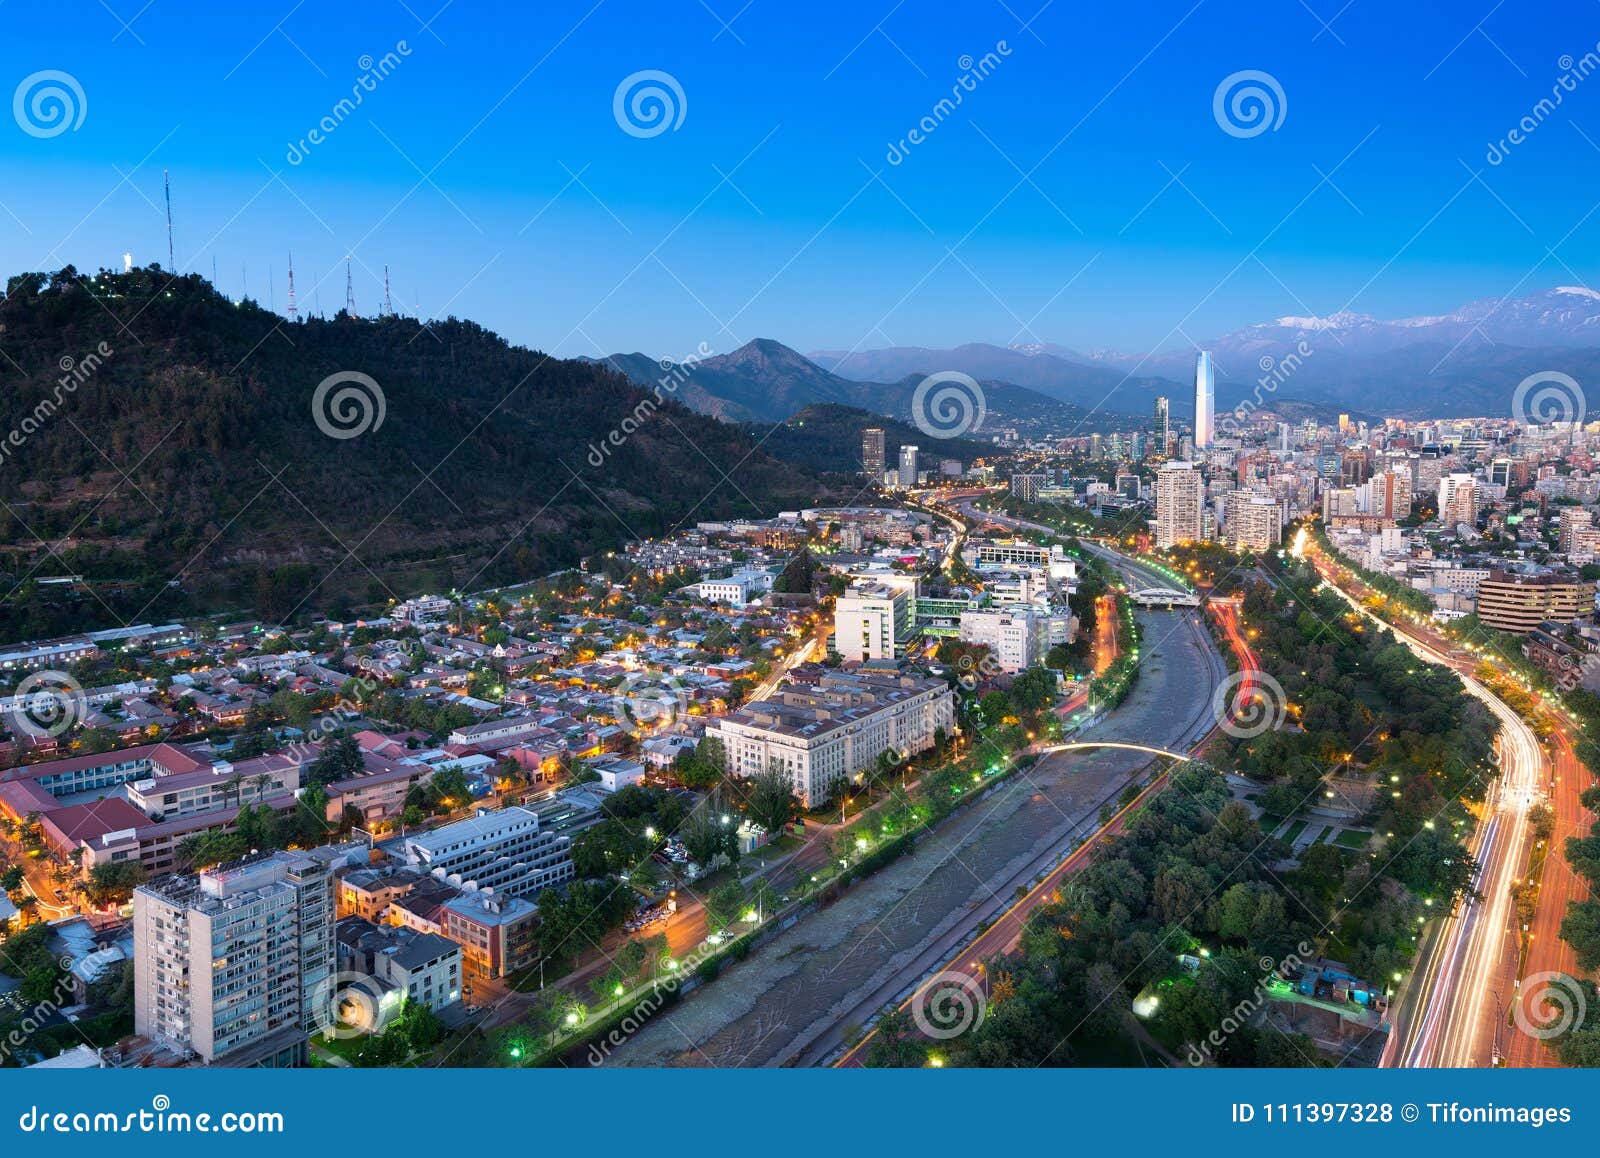 panoramic view of providencia and las condes districts in santiago de chile